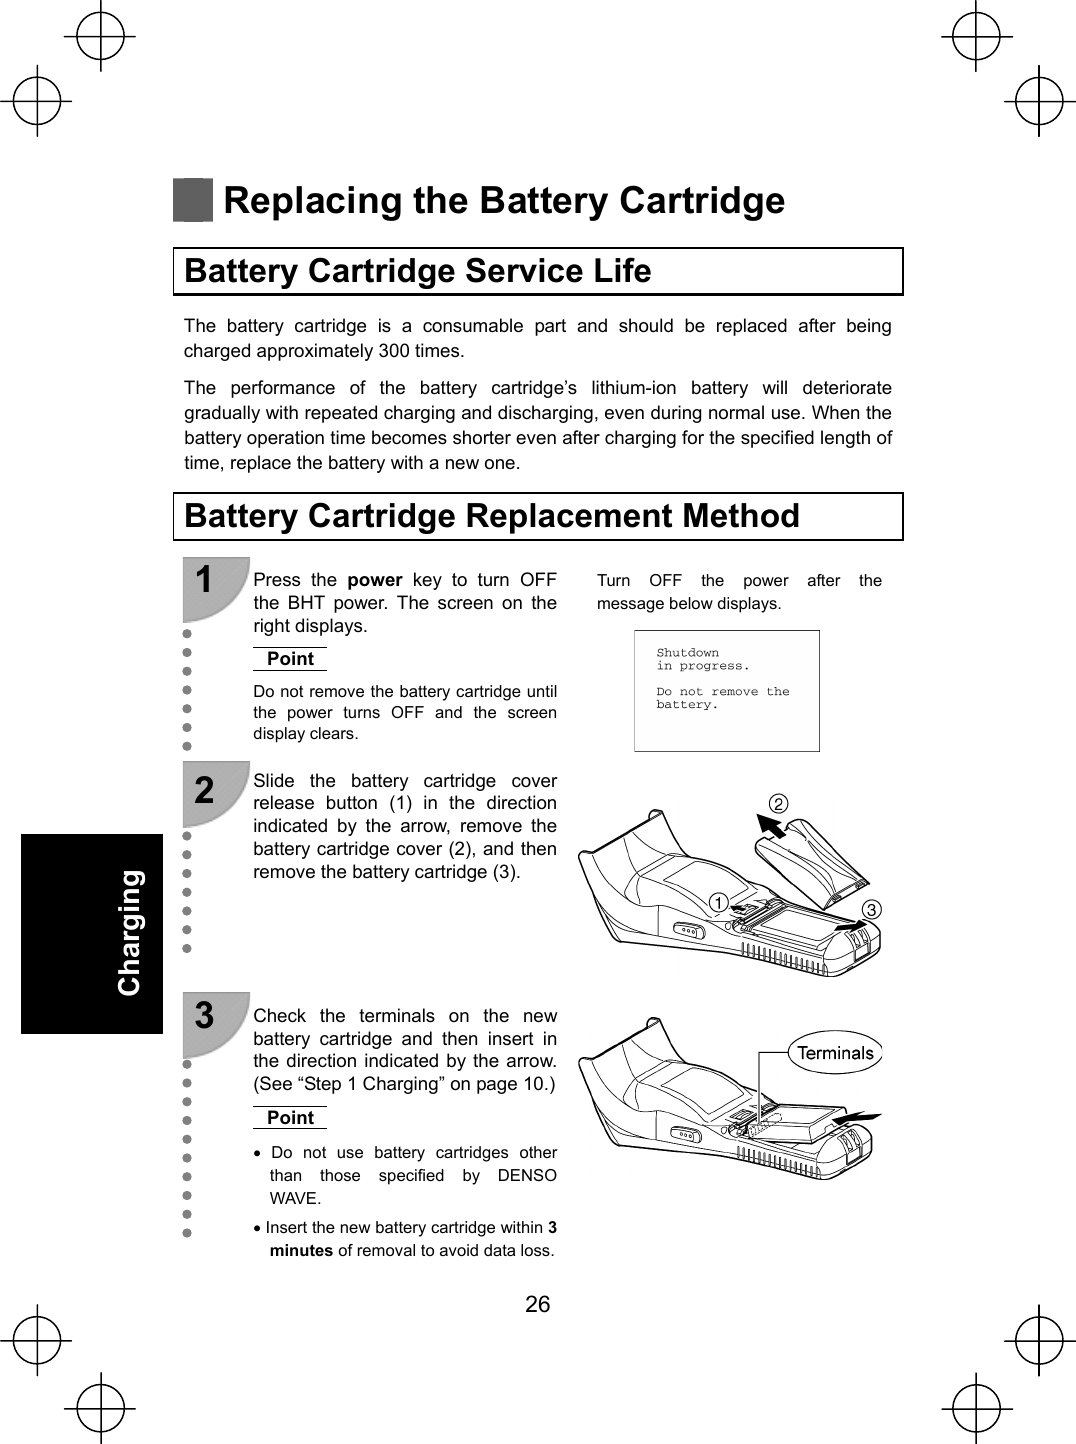  26   Charging    Replacing the Battery Cartridge  Battery Cartridge Service Life The battery cartridge is a consumable part and should be replaced after being charged approximately 300 times. The performance of the battery cartridge’s lithium-ion battery will deteriorate gradually with repeated charging and discharging, even during normal use. When the battery operation time becomes shorter even after charging for the specified length of time, replace the battery with a new one.  Battery Cartridge Replacement Method  1  Press the power key to turn OFF the BHT power. The screen on the right displays. Point Do not remove the battery cartridge until the power turns OFF and the screen display clears. Turn OFF the power after the message below displays.   2  Slide the battery cartridge cover release button (1) in the direction indicated by the arrow, remove the battery cartridge cover (2), and then remove the battery cartridge (3).    3  Check the terminals on the new battery cartridge and then insert in the direction indicated by the arrow. (See “Step 1 Charging” on page 10.)Point x Do not use battery cartridges other than those specified by DENSO WAVE. x Insert the new battery cartridge within 3 minutes of removal to avoid data loss.    